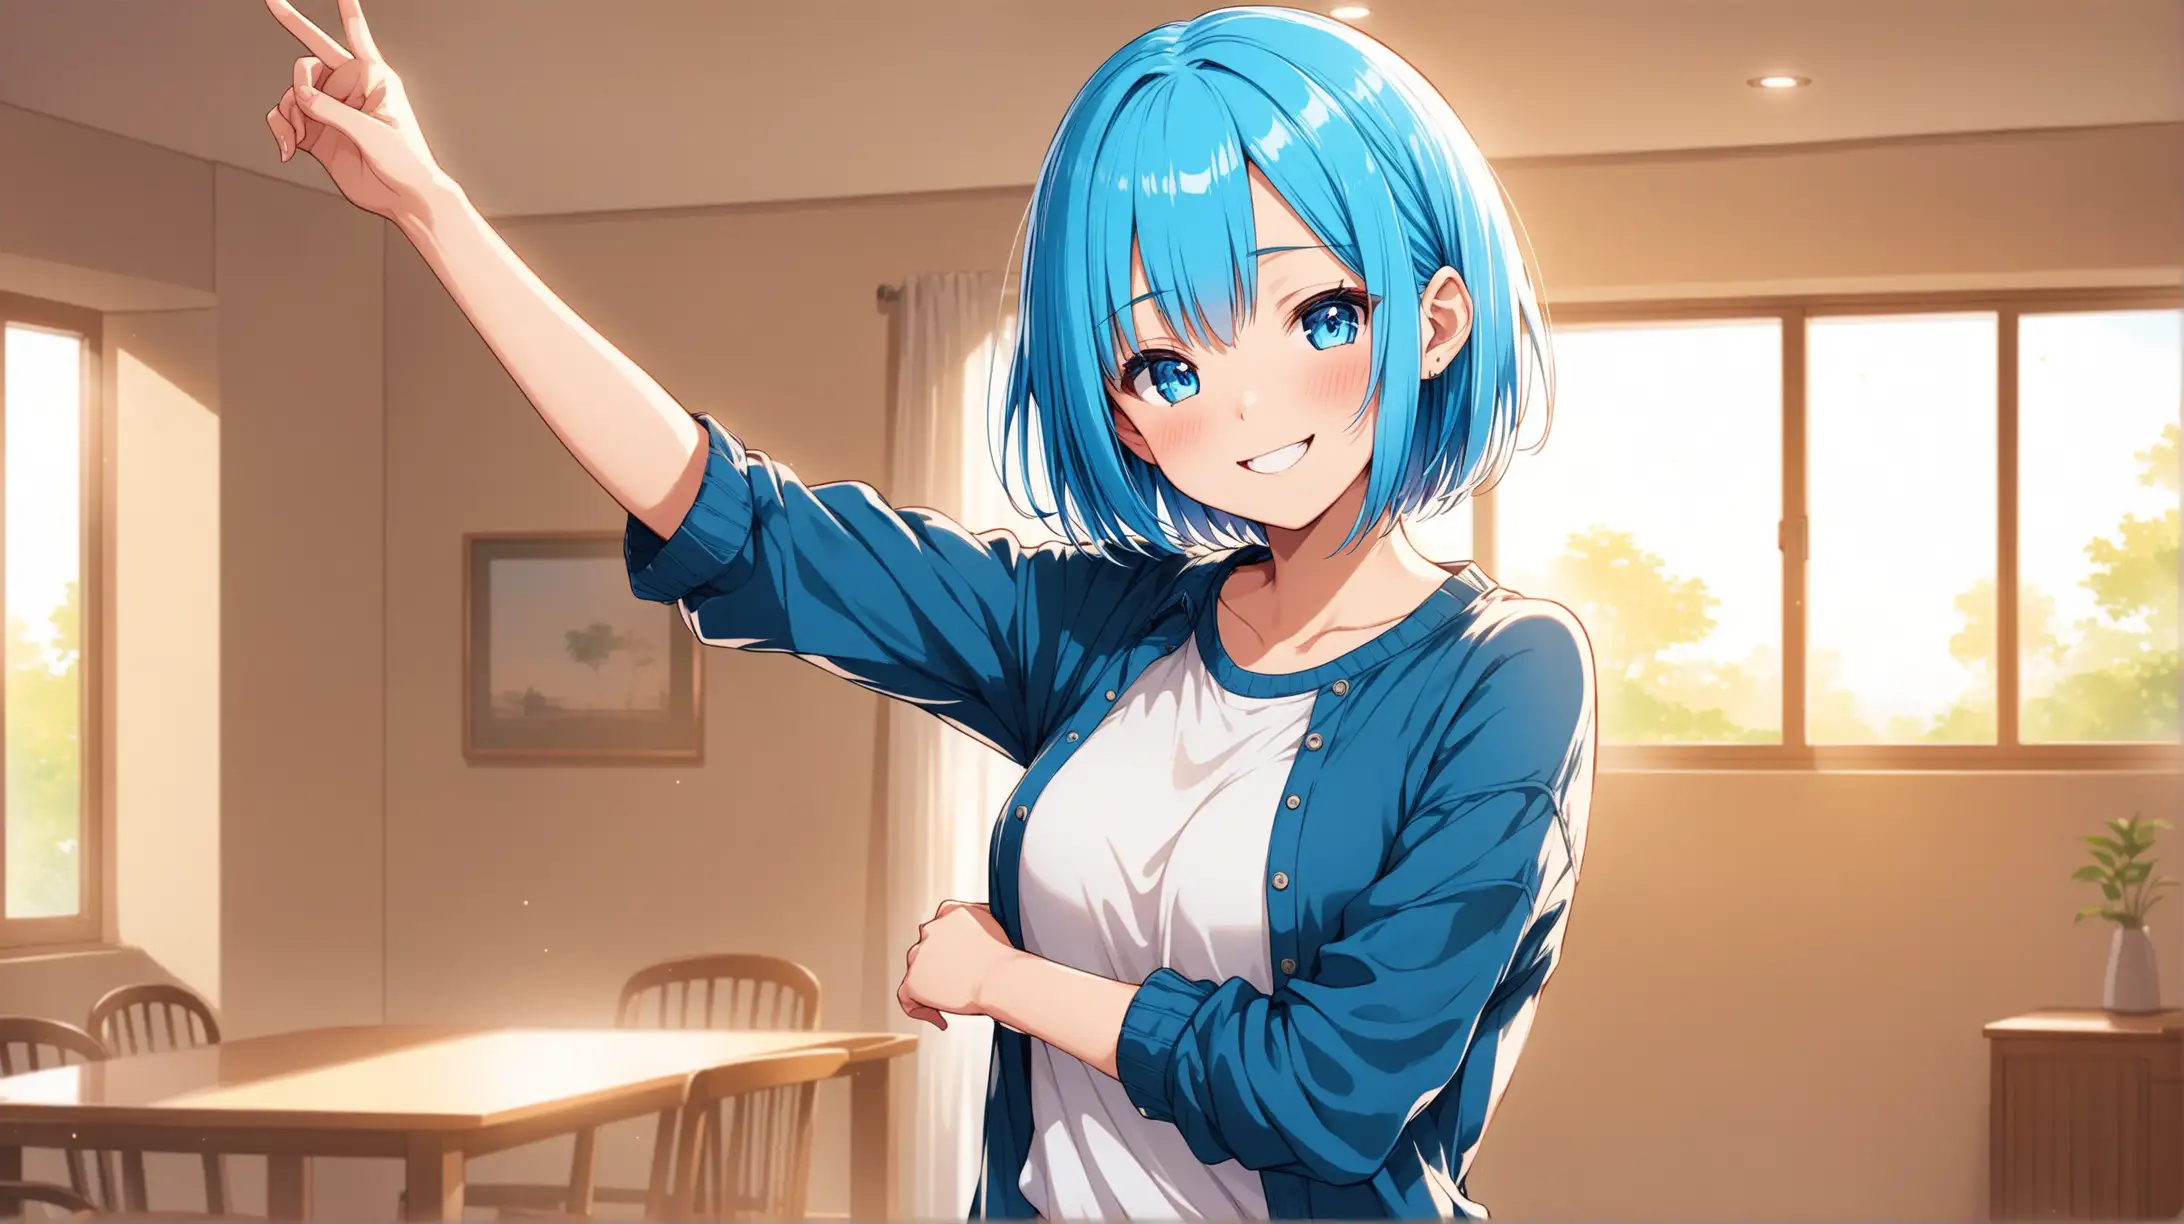 Draw the character Rem, high quality, natural lighting, long shot, indoors, standing, fun pose, wearing a casual outfit, smiling at the viewer